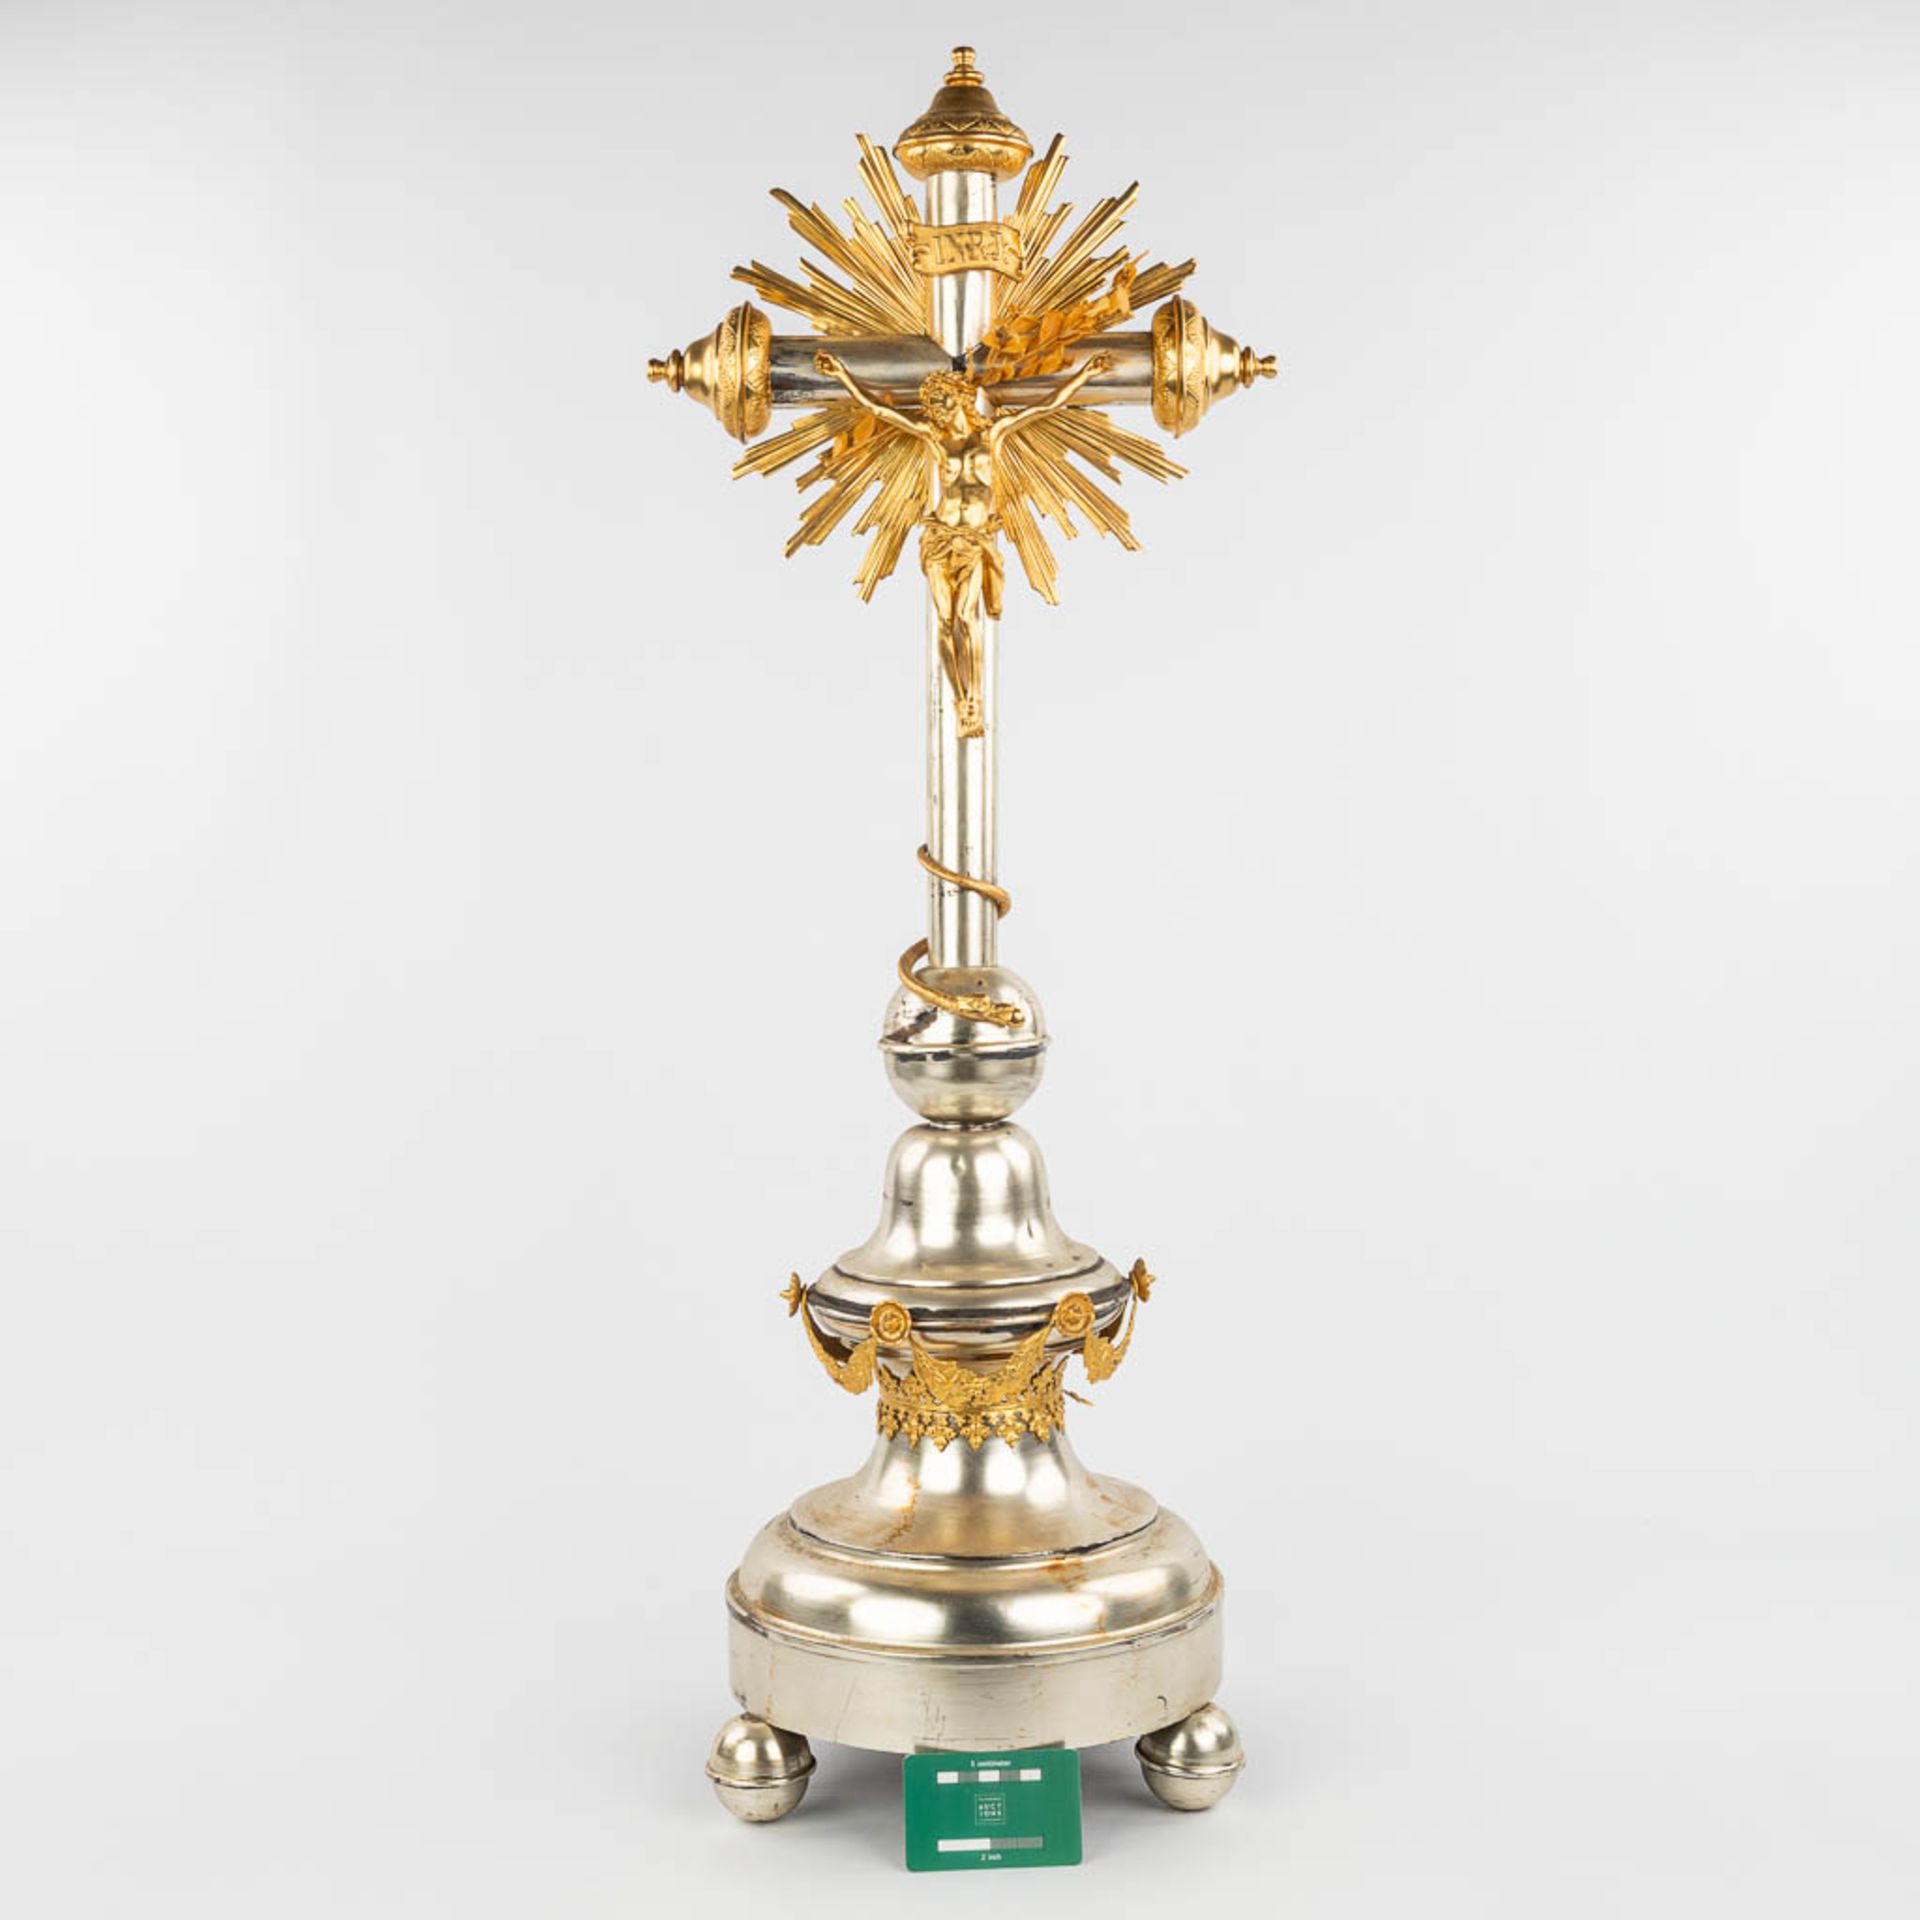 A crucifix made of silver-plated metal and decorated with gilt elements. (H:90cm) - Image 9 of 14